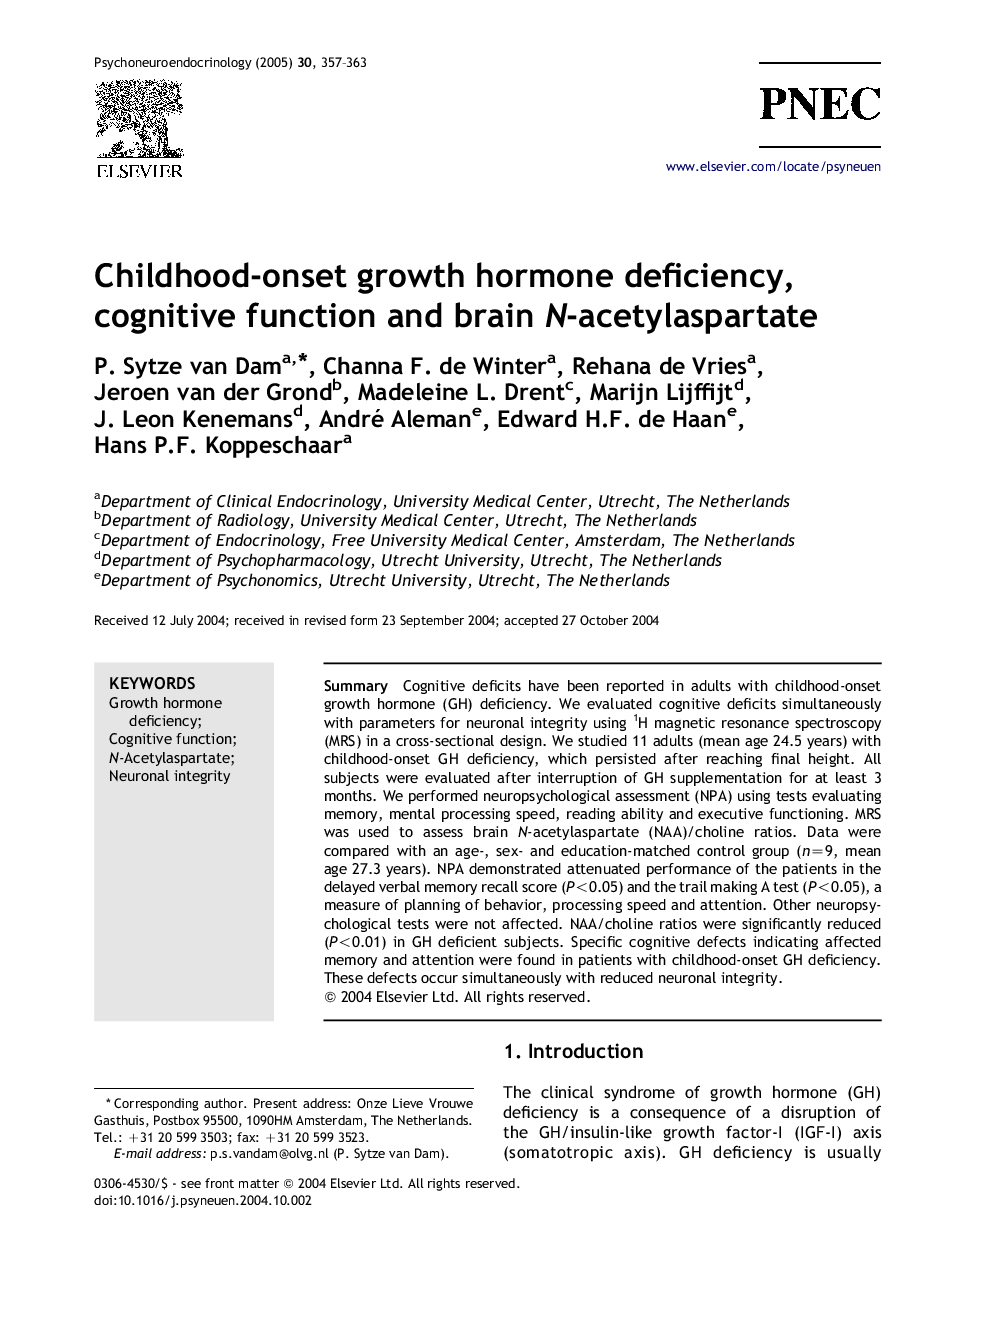 Childhood-onset growth hormone deficiency, cognitive function and brain N-acetylaspartate